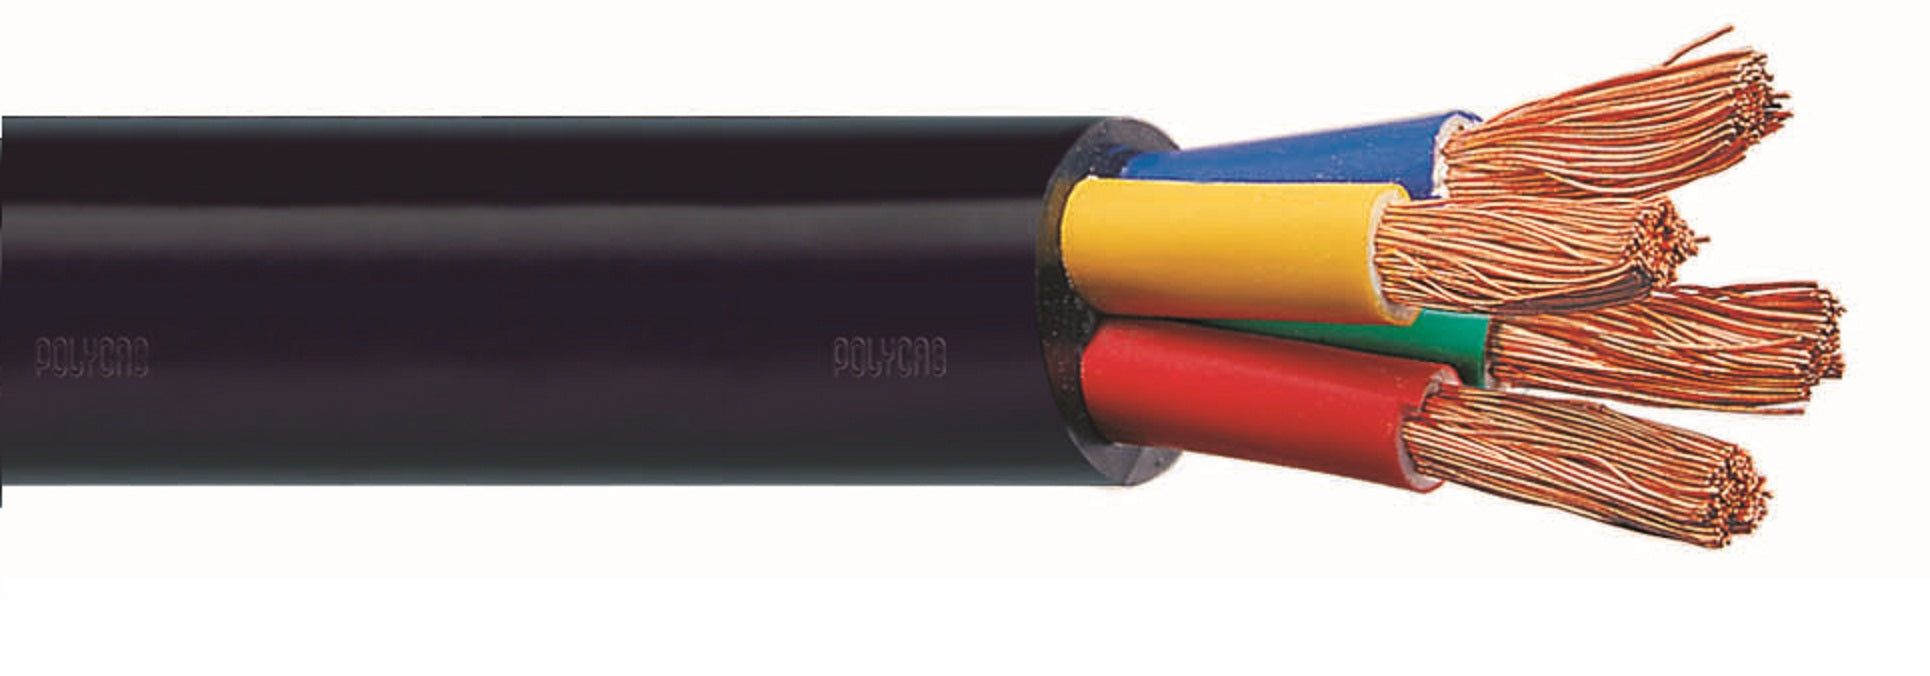 Polycab 70 Sqmm, 4 core Pvc Insulated & Sheathed Copper Flexible Cable Black (1 Meter)